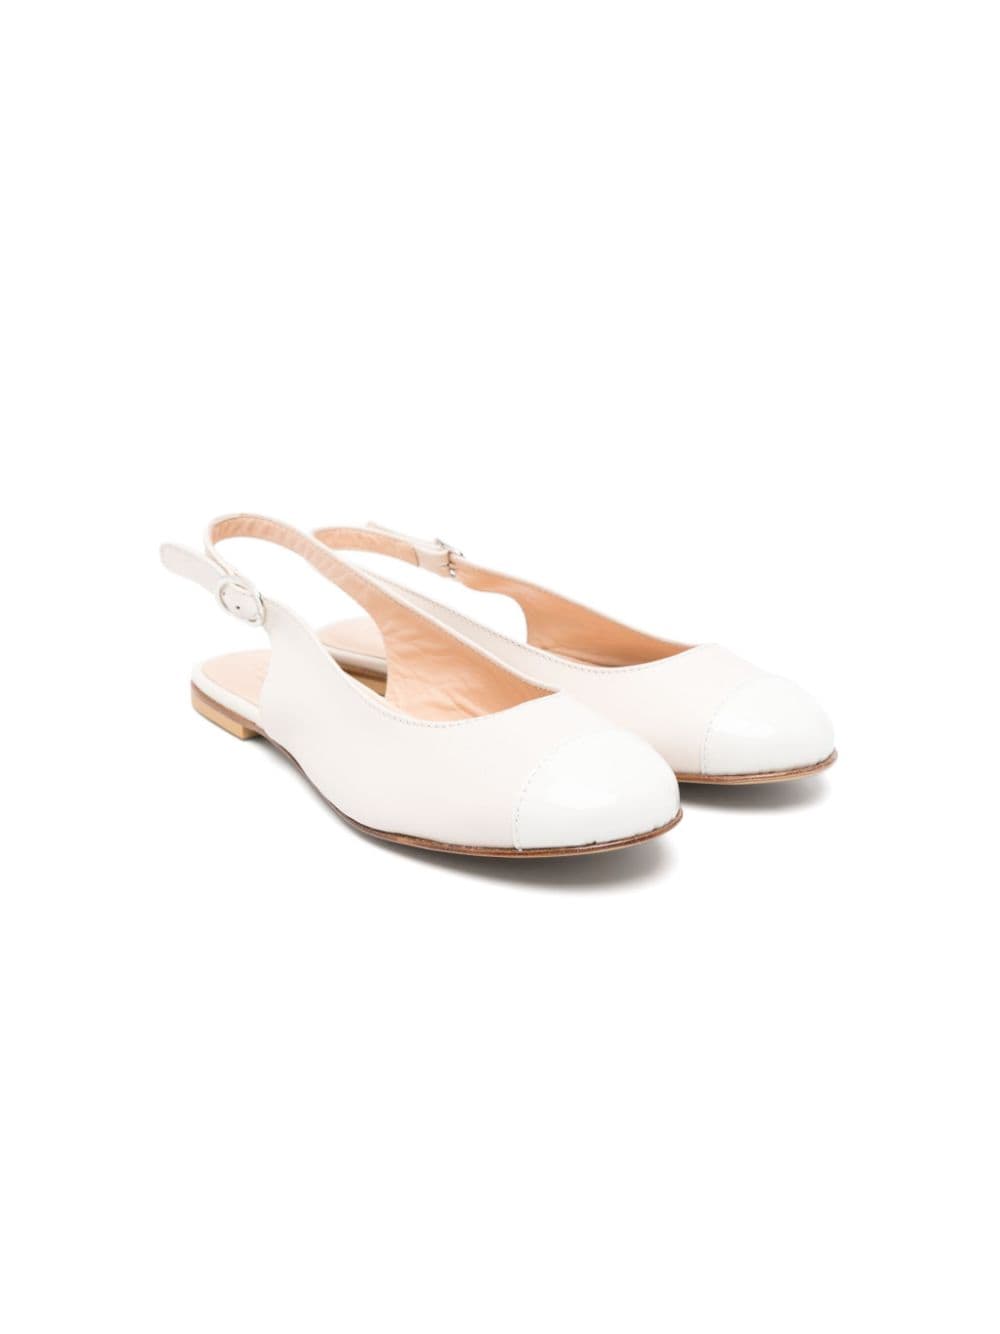 MONTELPARE TRADITION panelled leather ballerina shoes - Neutrals von MONTELPARE TRADITION